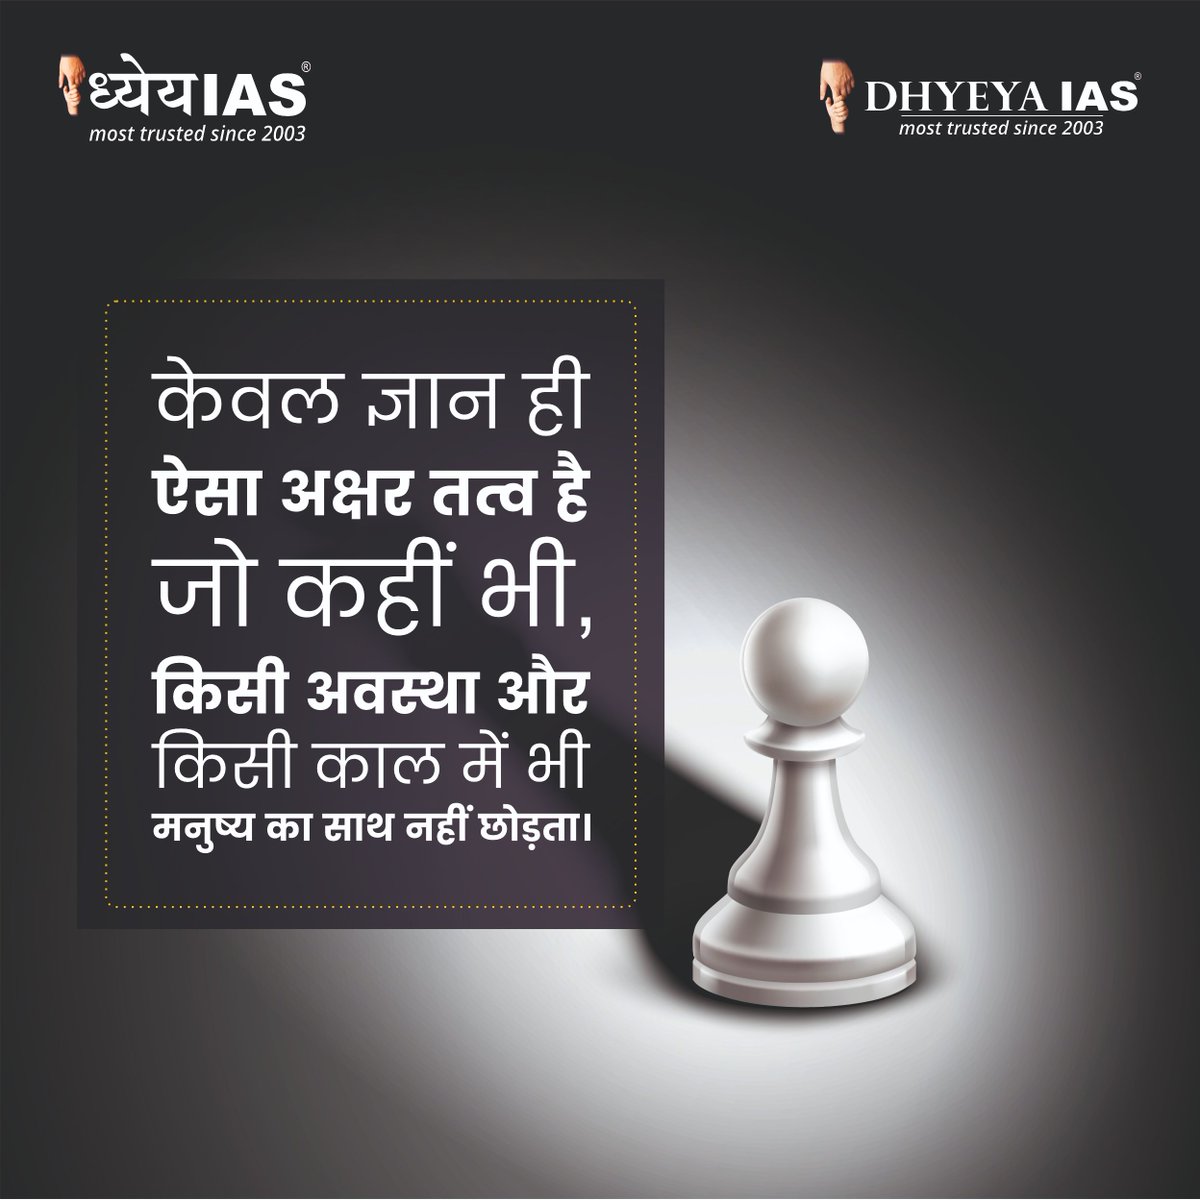 आज का विचार। 😊
Follow us for our daily motivational quotes.
______________________________________________
#morningmotivation #goodmorning #hindiquotes #DhyeyaIAS